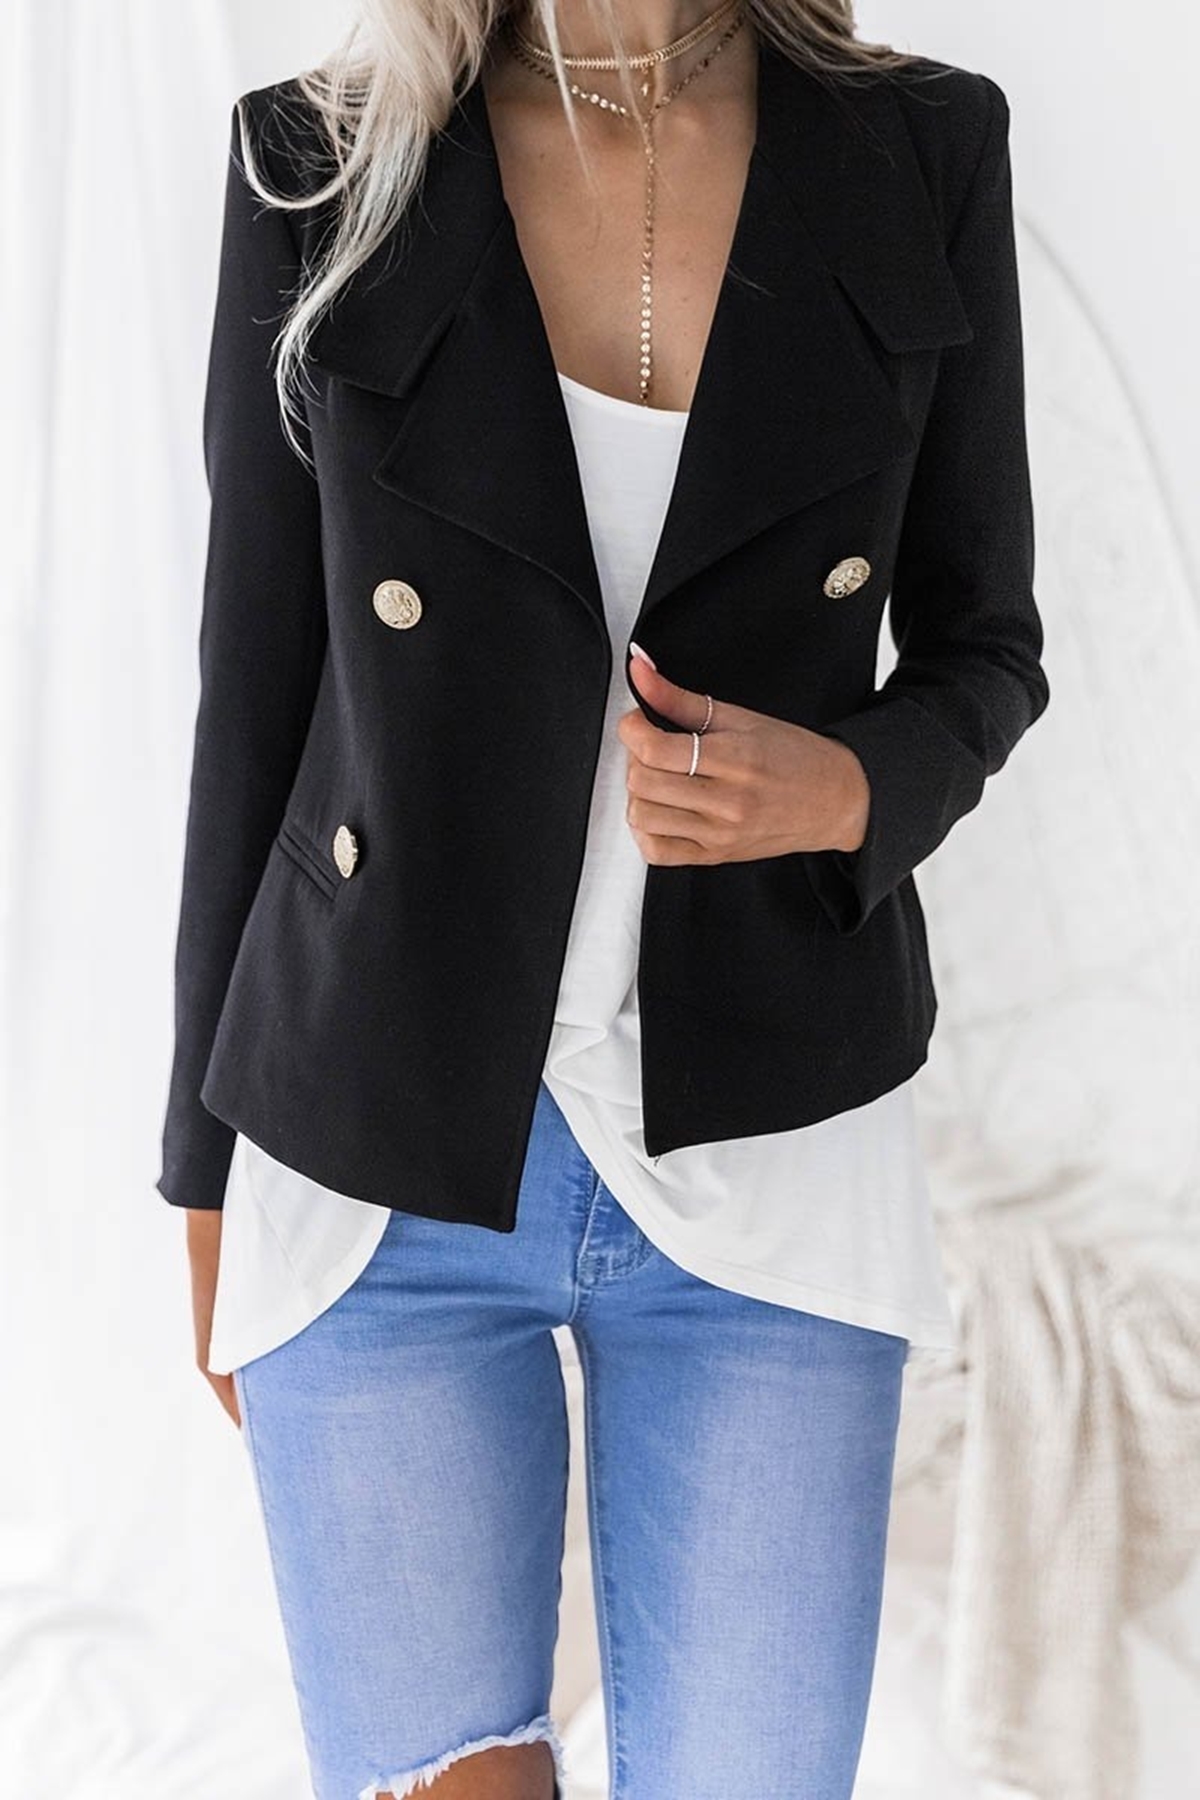 What should be considered when sewing the Blazer Jacket Button ?